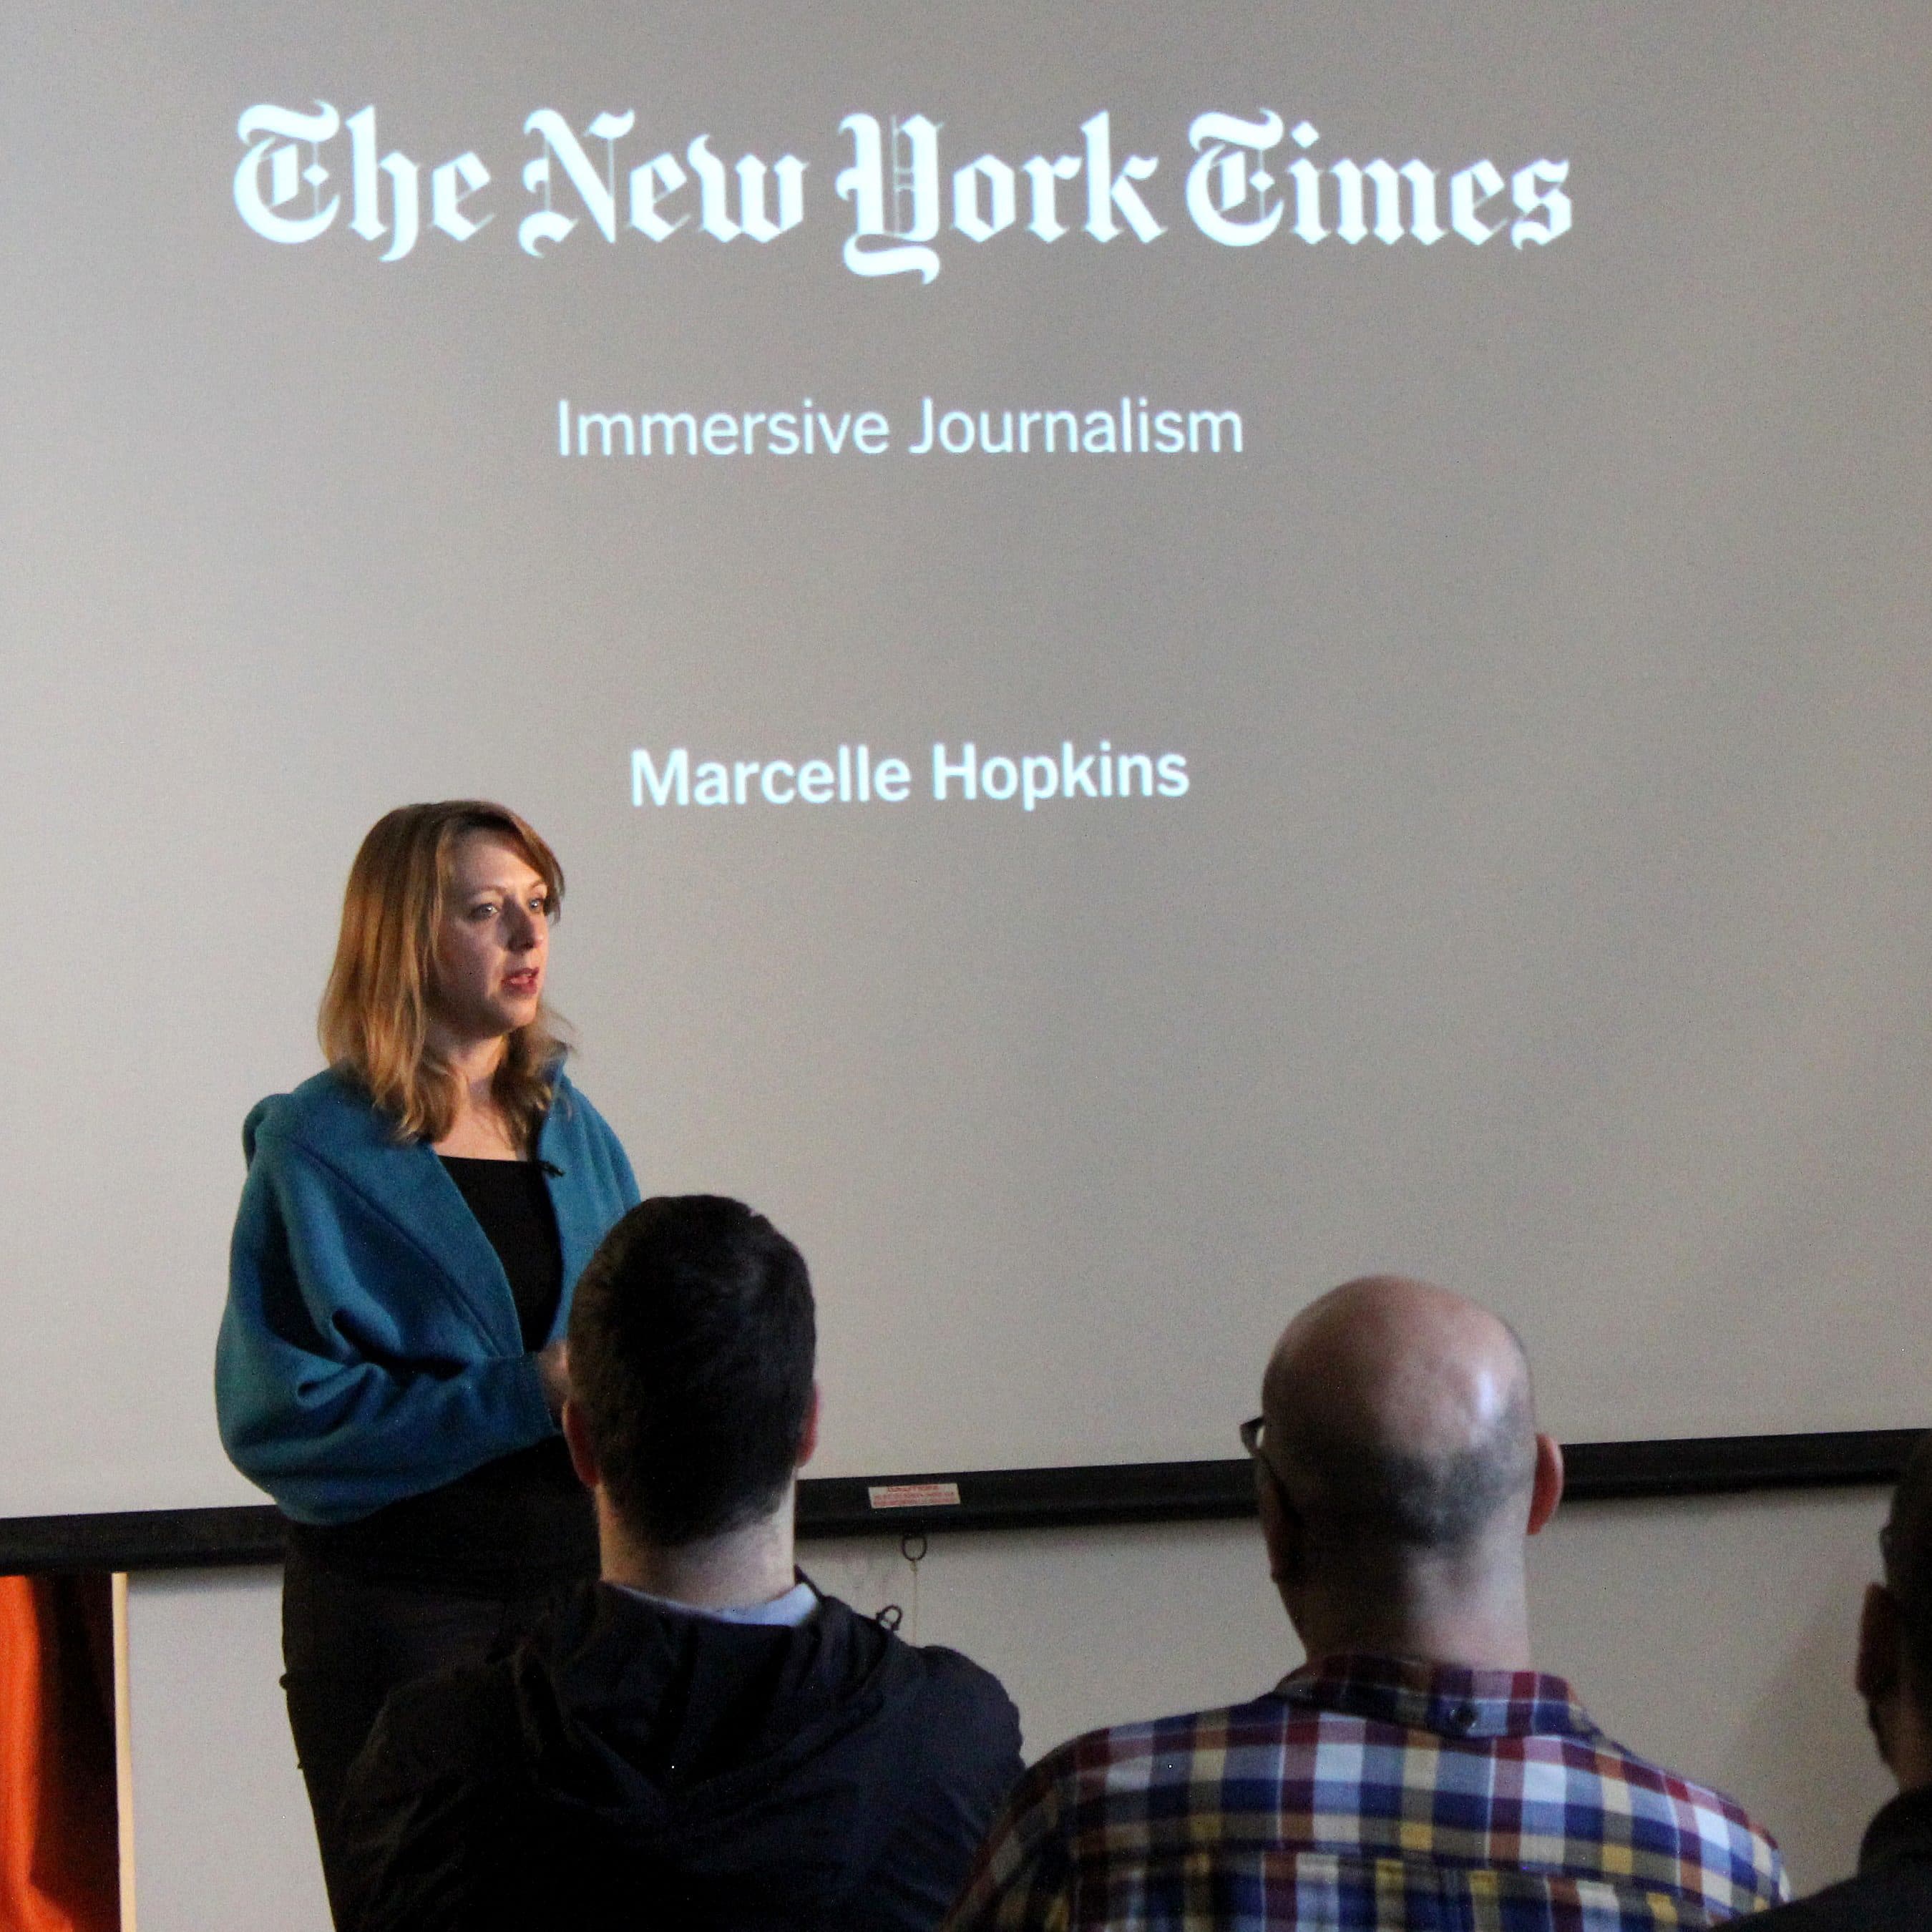 A woman stands and speaks in front of a projected presentation slide titled "The New York Times Immersive Journalism" with the name "Marcelle Hopkins" below it. She is addressing an audience of seated people.